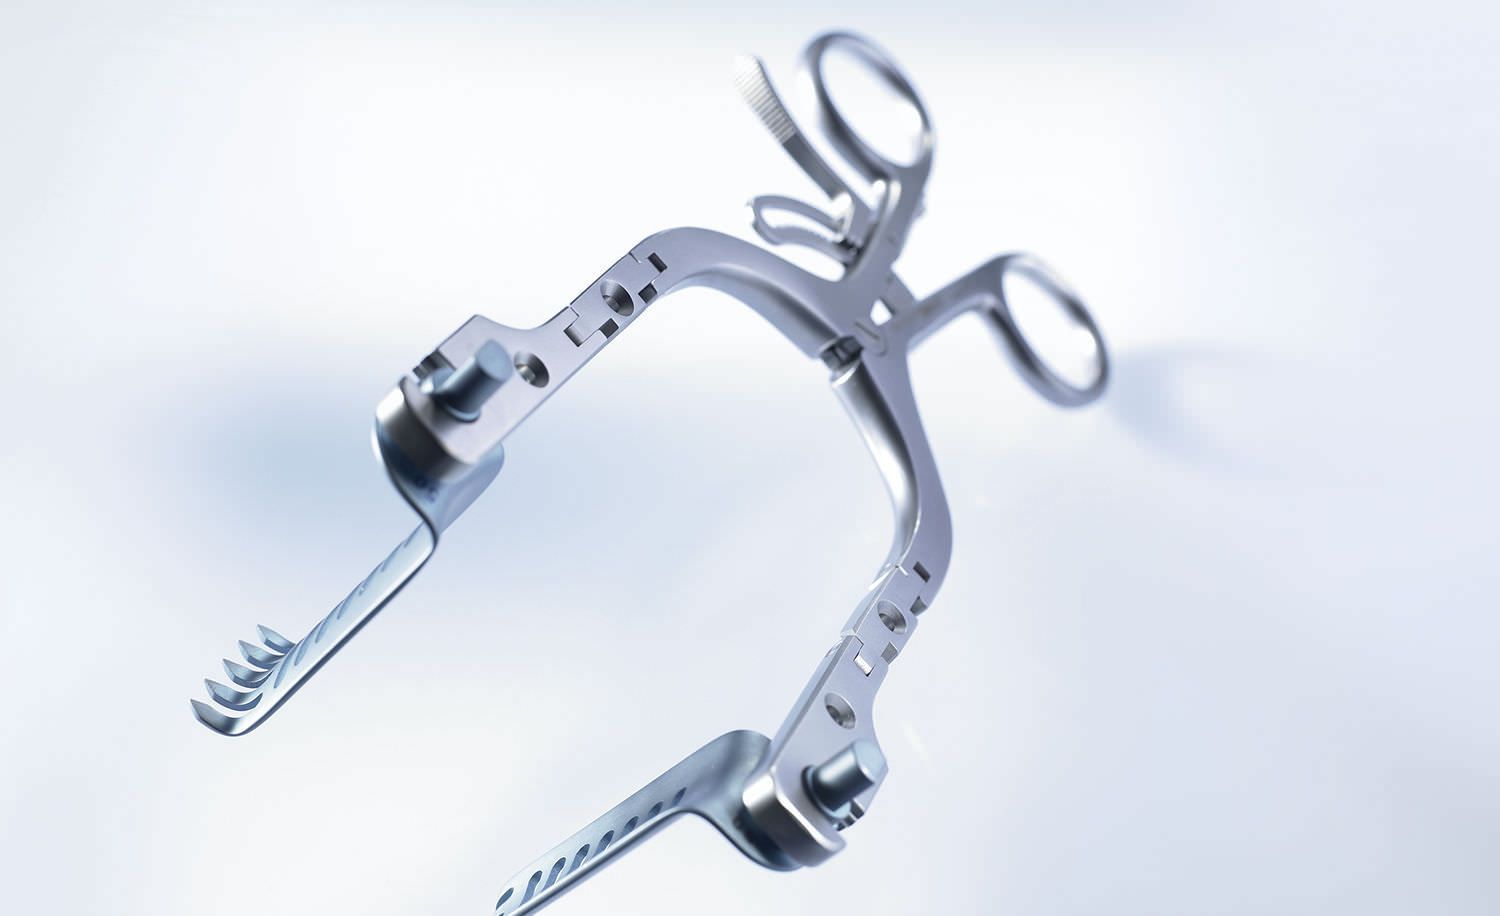 Orthopedic surgery retractor / cervical CCR Aesculap - a B. Braun company